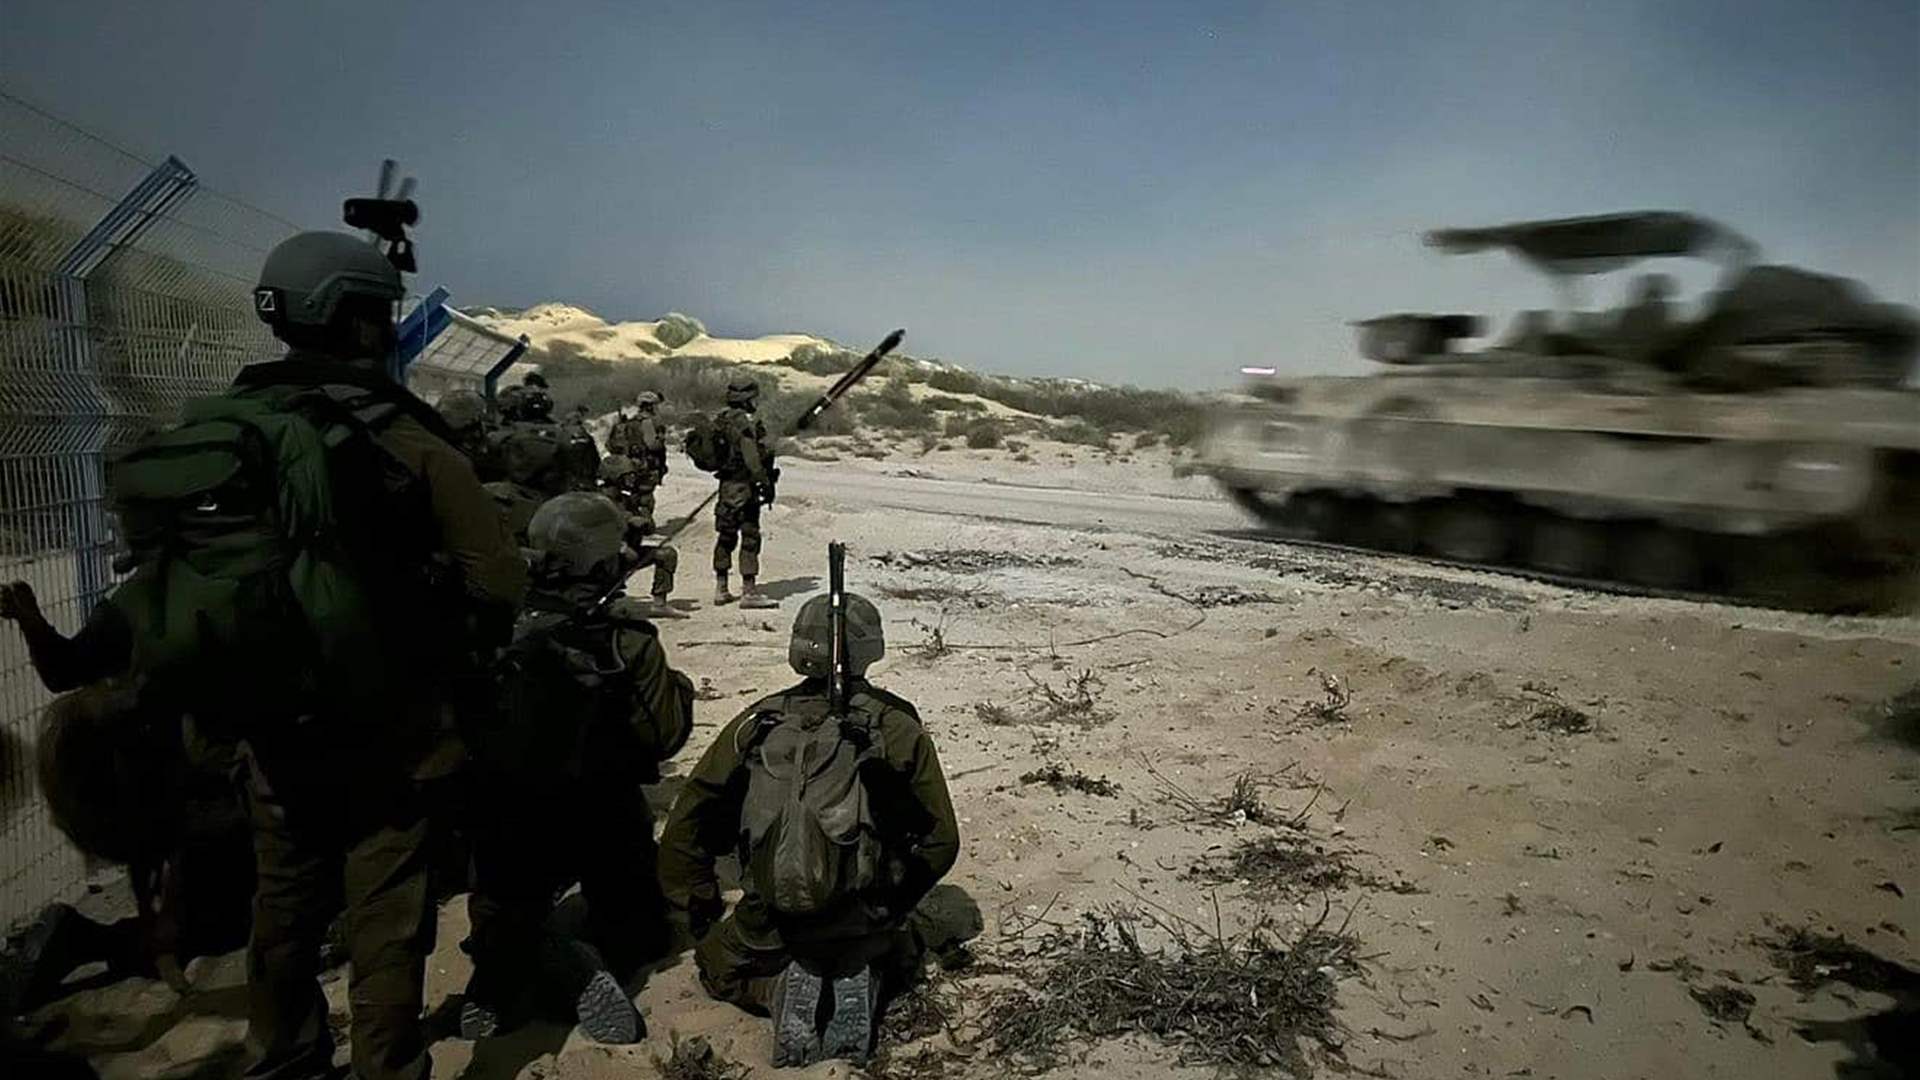 Israeli army announces the killing of three soldiers in the Gaza Strip, bringing the death toll to 62